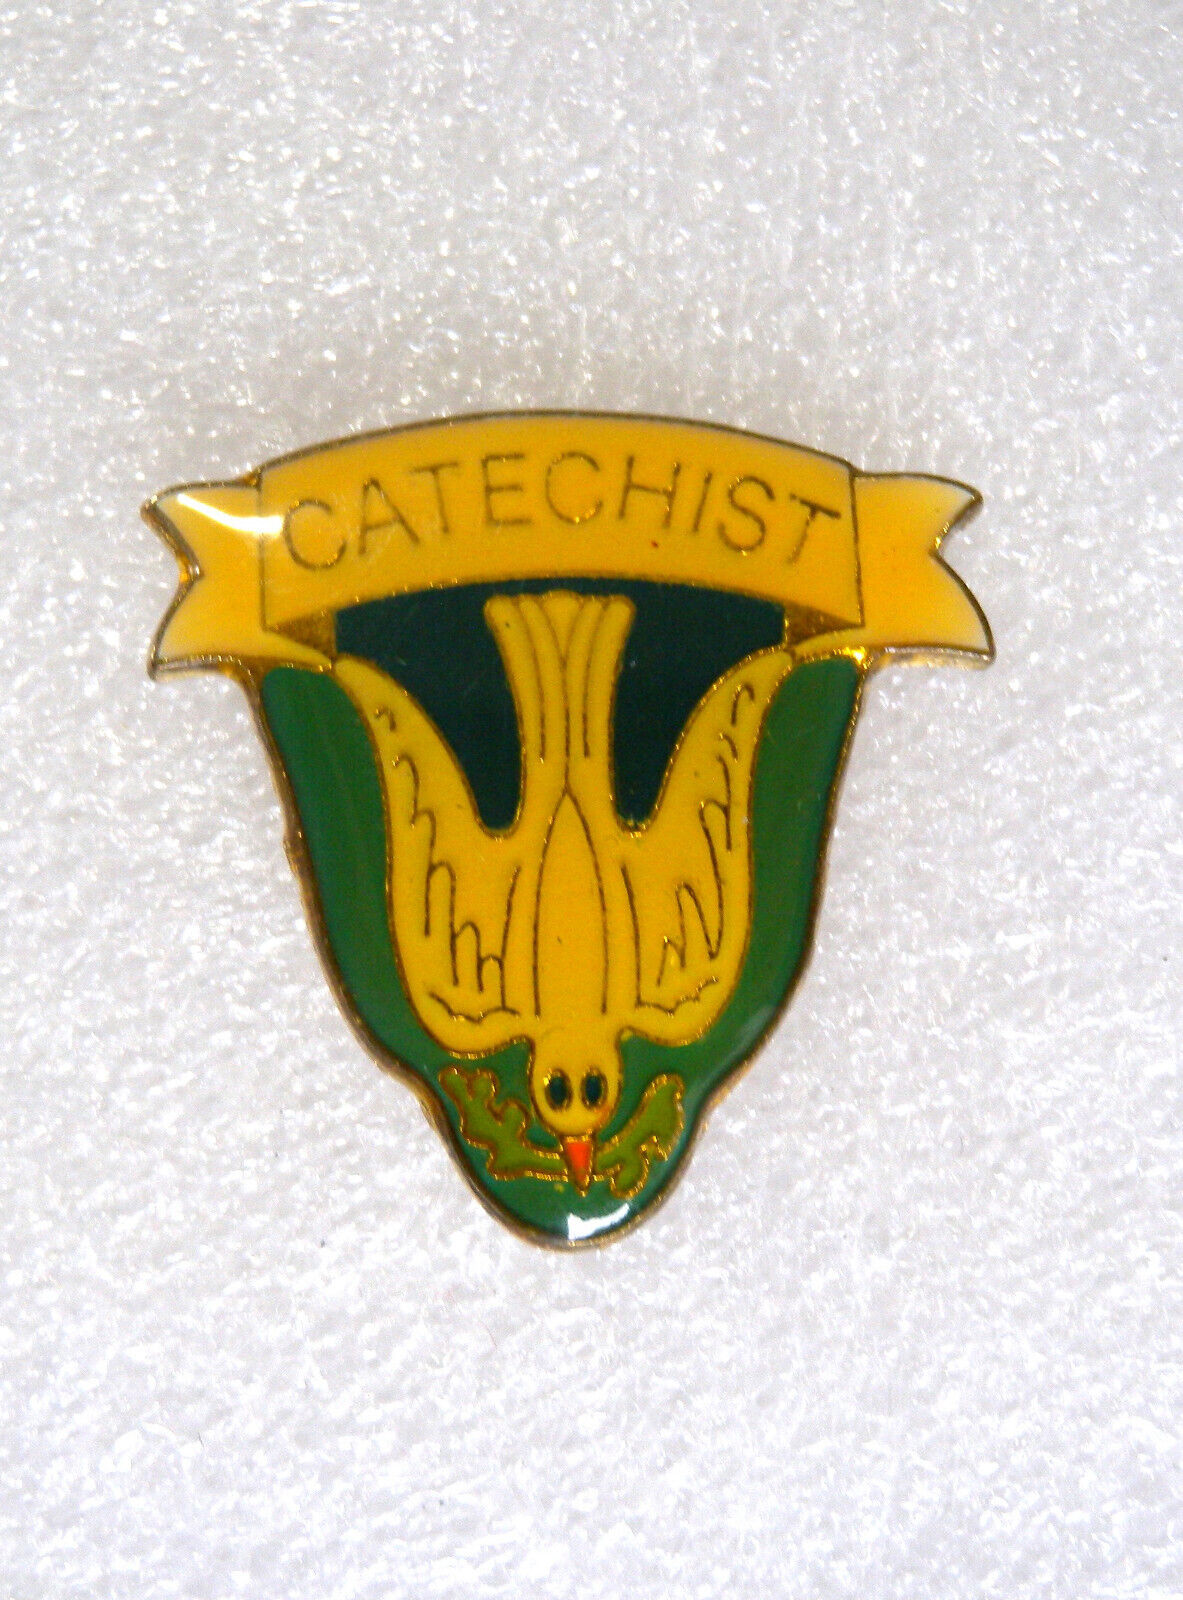 Catechist White Dove with Olive Branch Vintage Religious Lapel Hat Pin Tie Tack